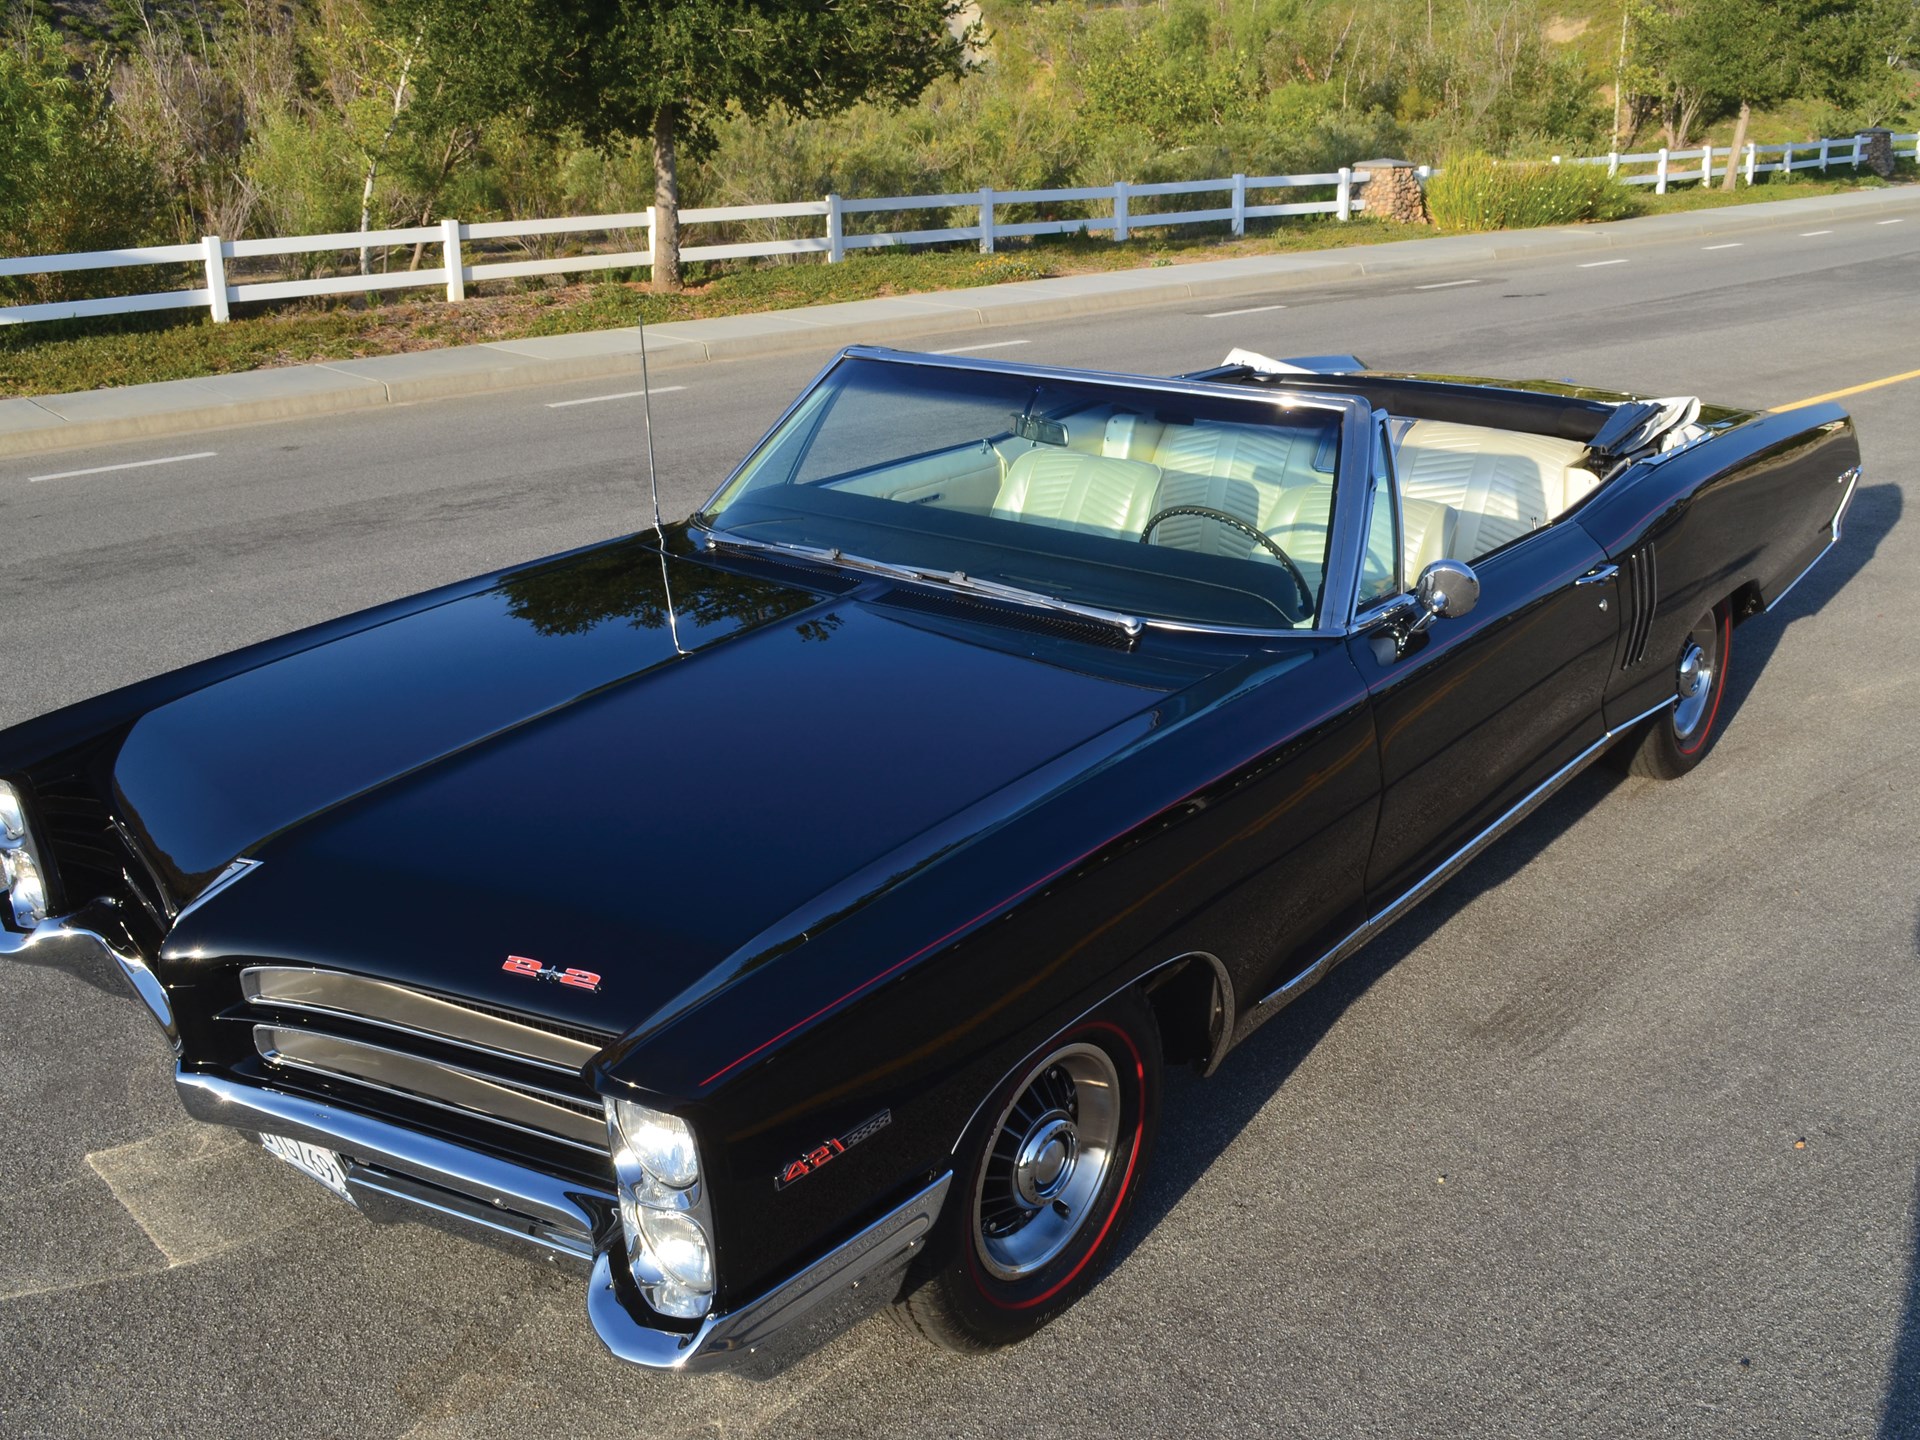 1966 Pontiac Catalina 2+2 421 for sale at RM Sotheby's California.